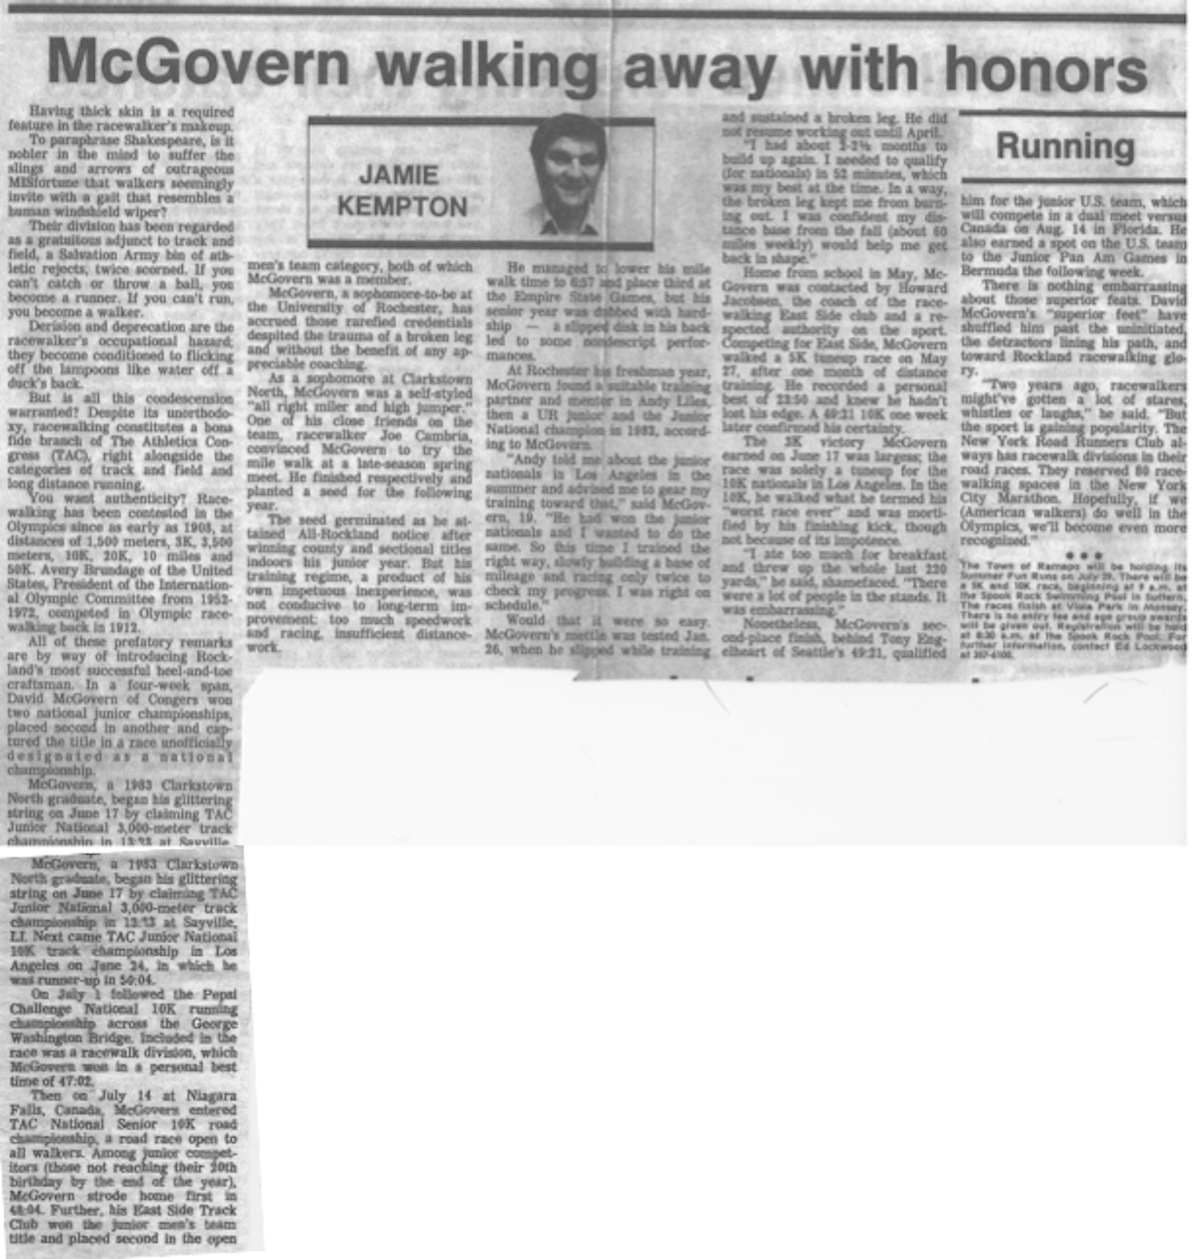 McGovern Walking Away with Honors